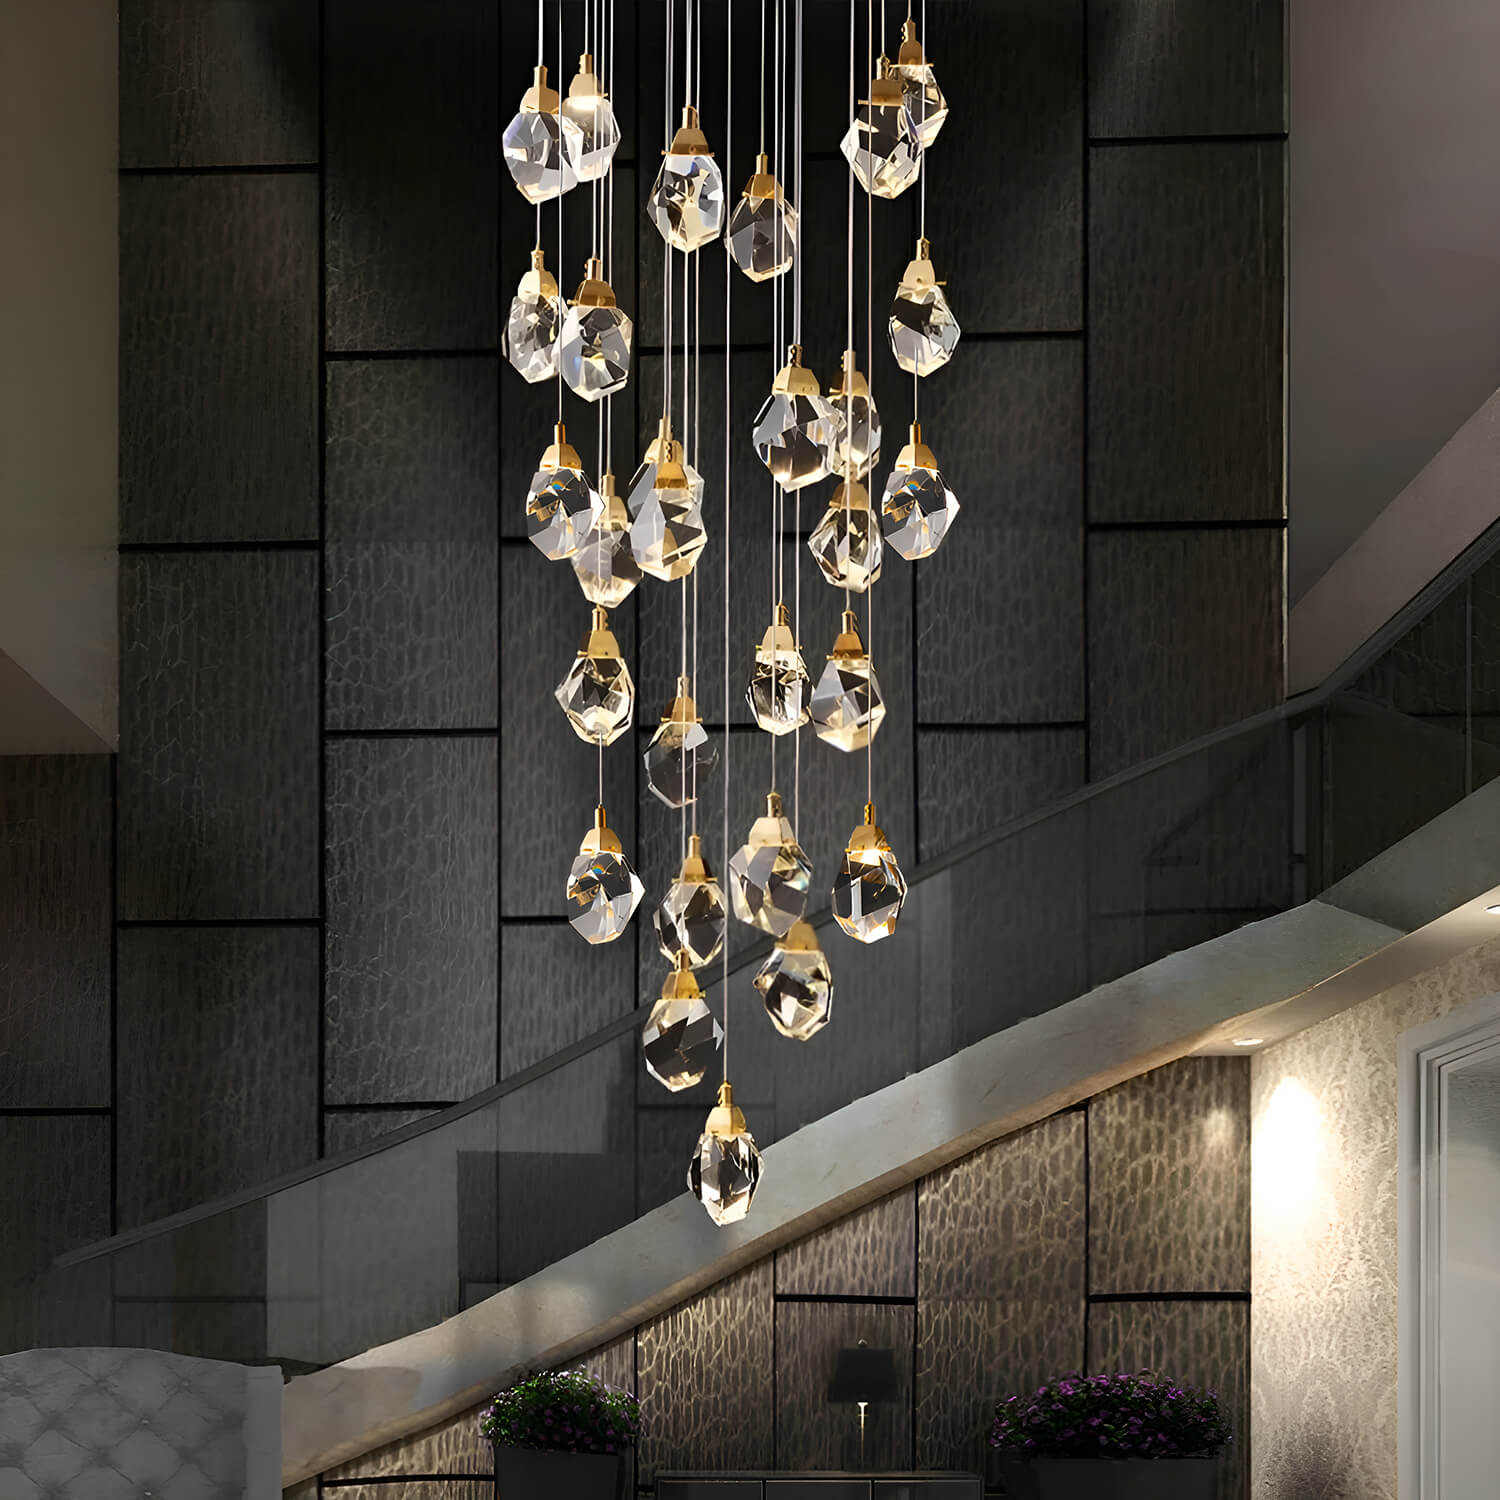 Modern Golden Raindrop Crystal Chandeliers for High Ceilings in Foyer & Living Room